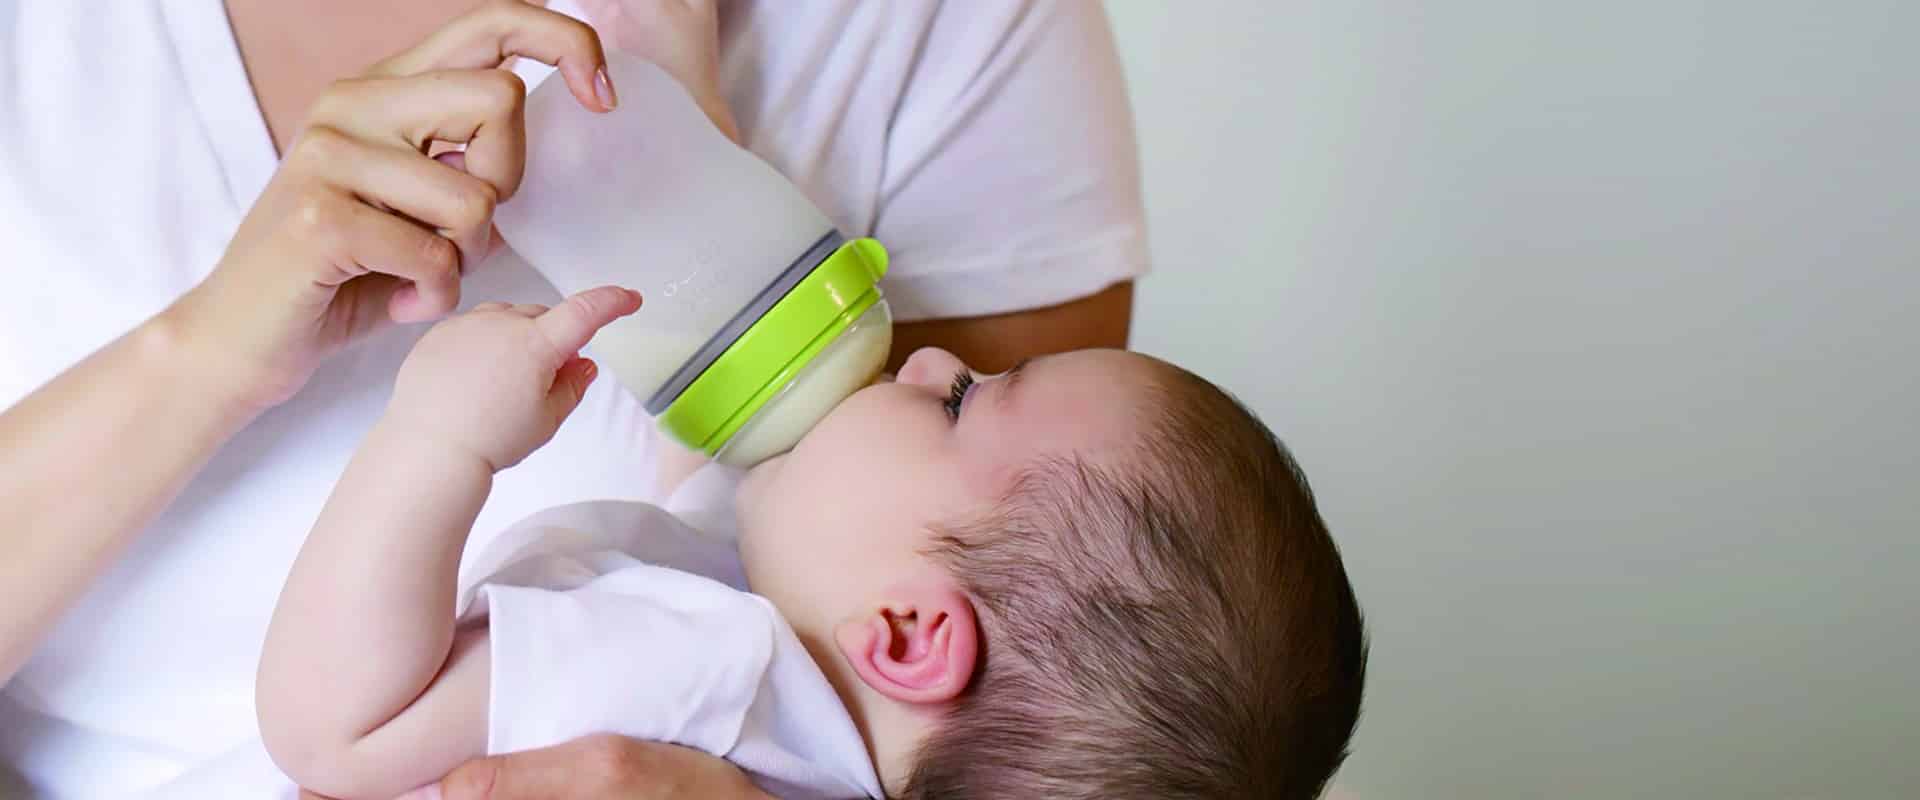 Boon NURSH Reusable Silicone Baby Bottles with Collapsible